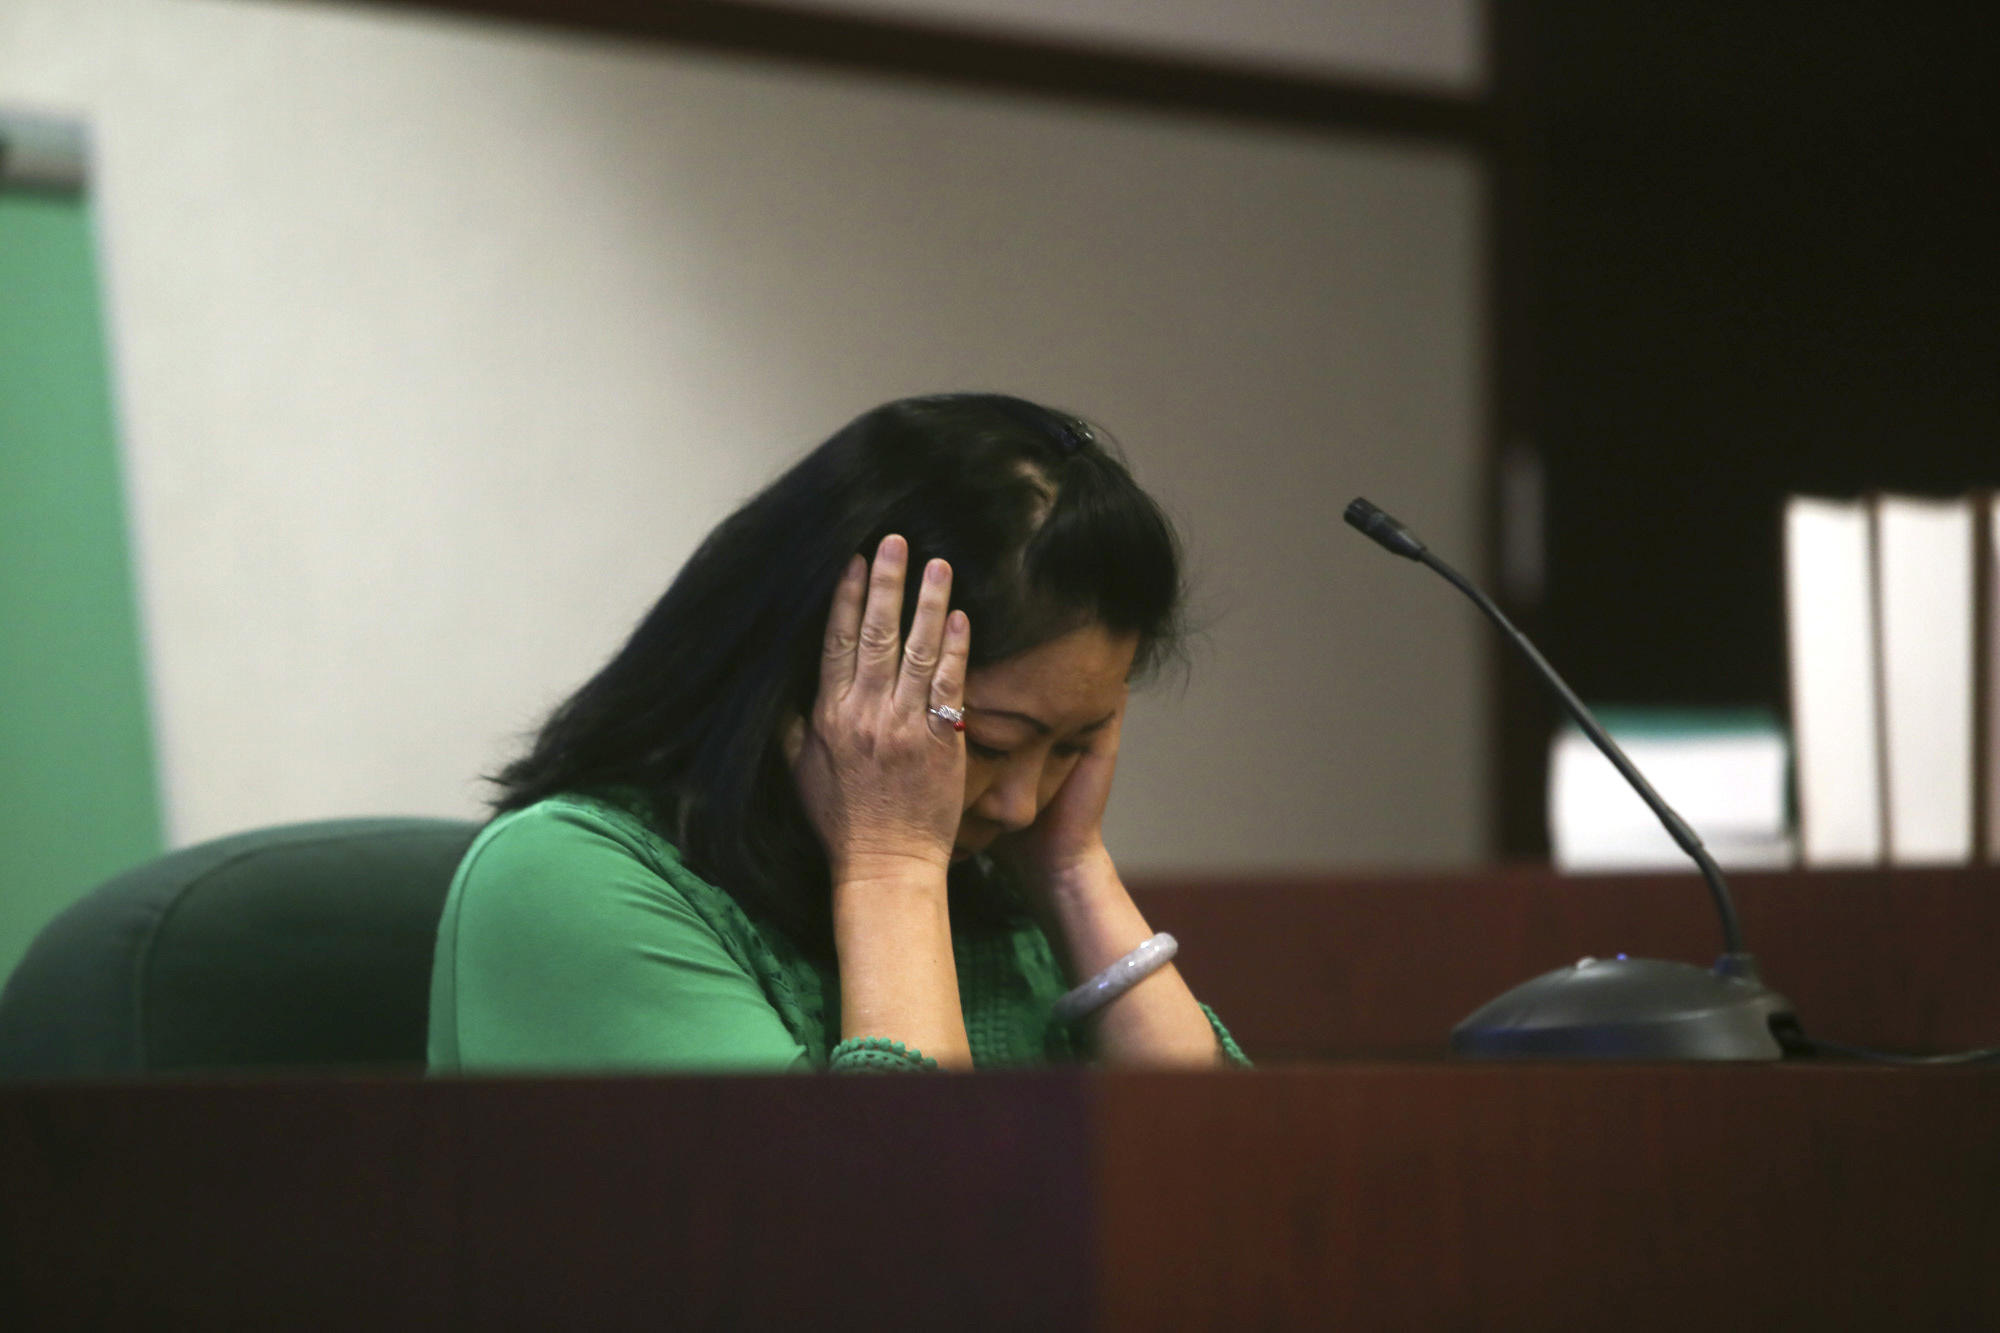 Joanna Turner, a witness, makes a gesture, Feb. 21, 2017, to describe how she saw Curtis Reeves react after shooting Chad Oulson during her testimony at a hearing in the case at the Robert D. Sumner Judicial Center in Dade City, Florida.